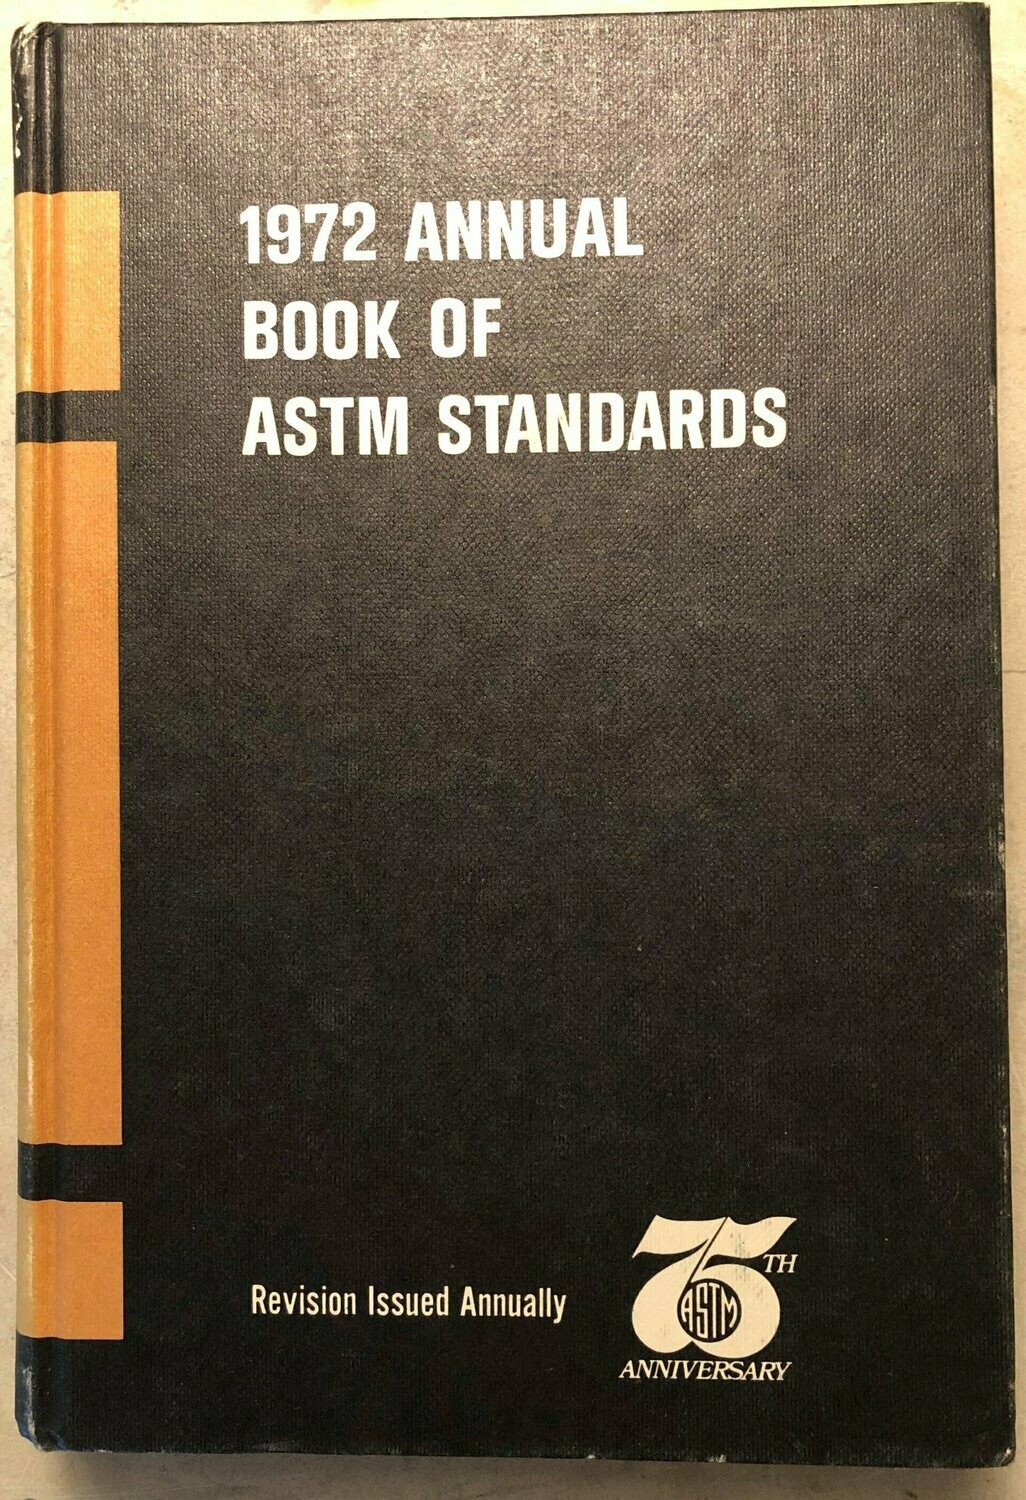 1972 Annual book of astm standards part 3